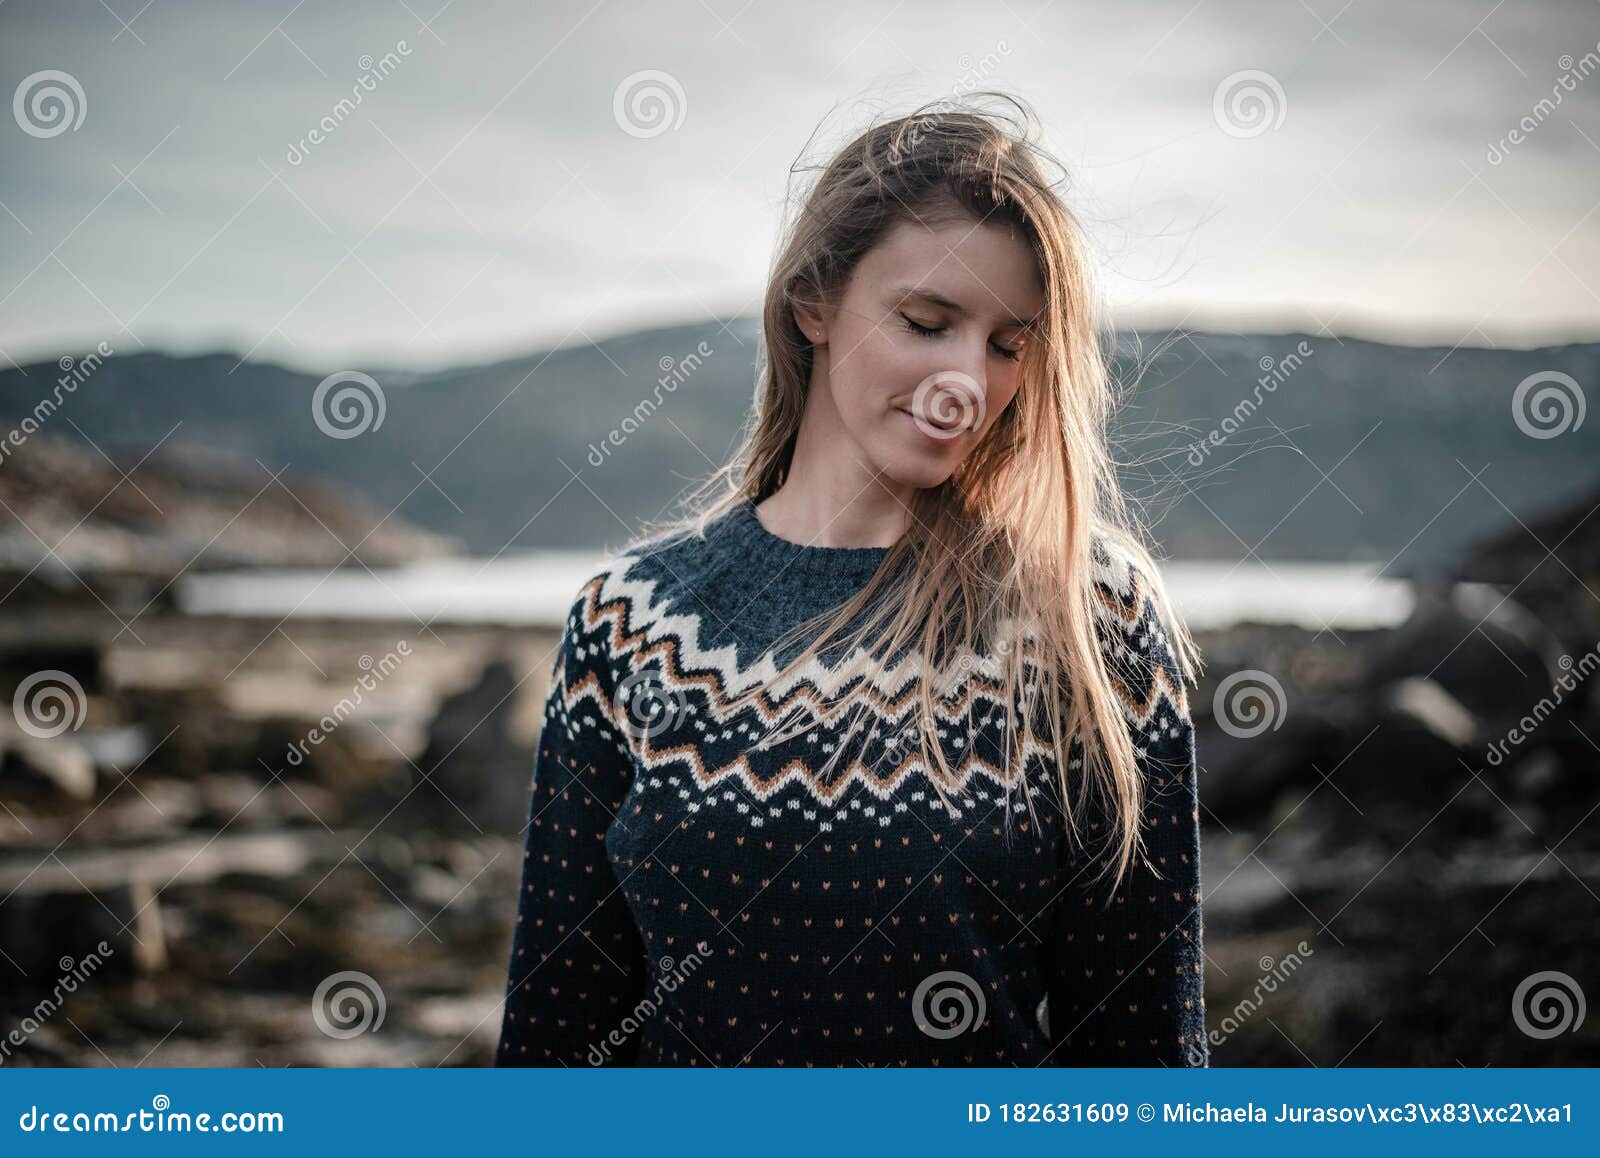 Romantic Portrait of Young Blonde Woman Smiling and Posing Next To a ...